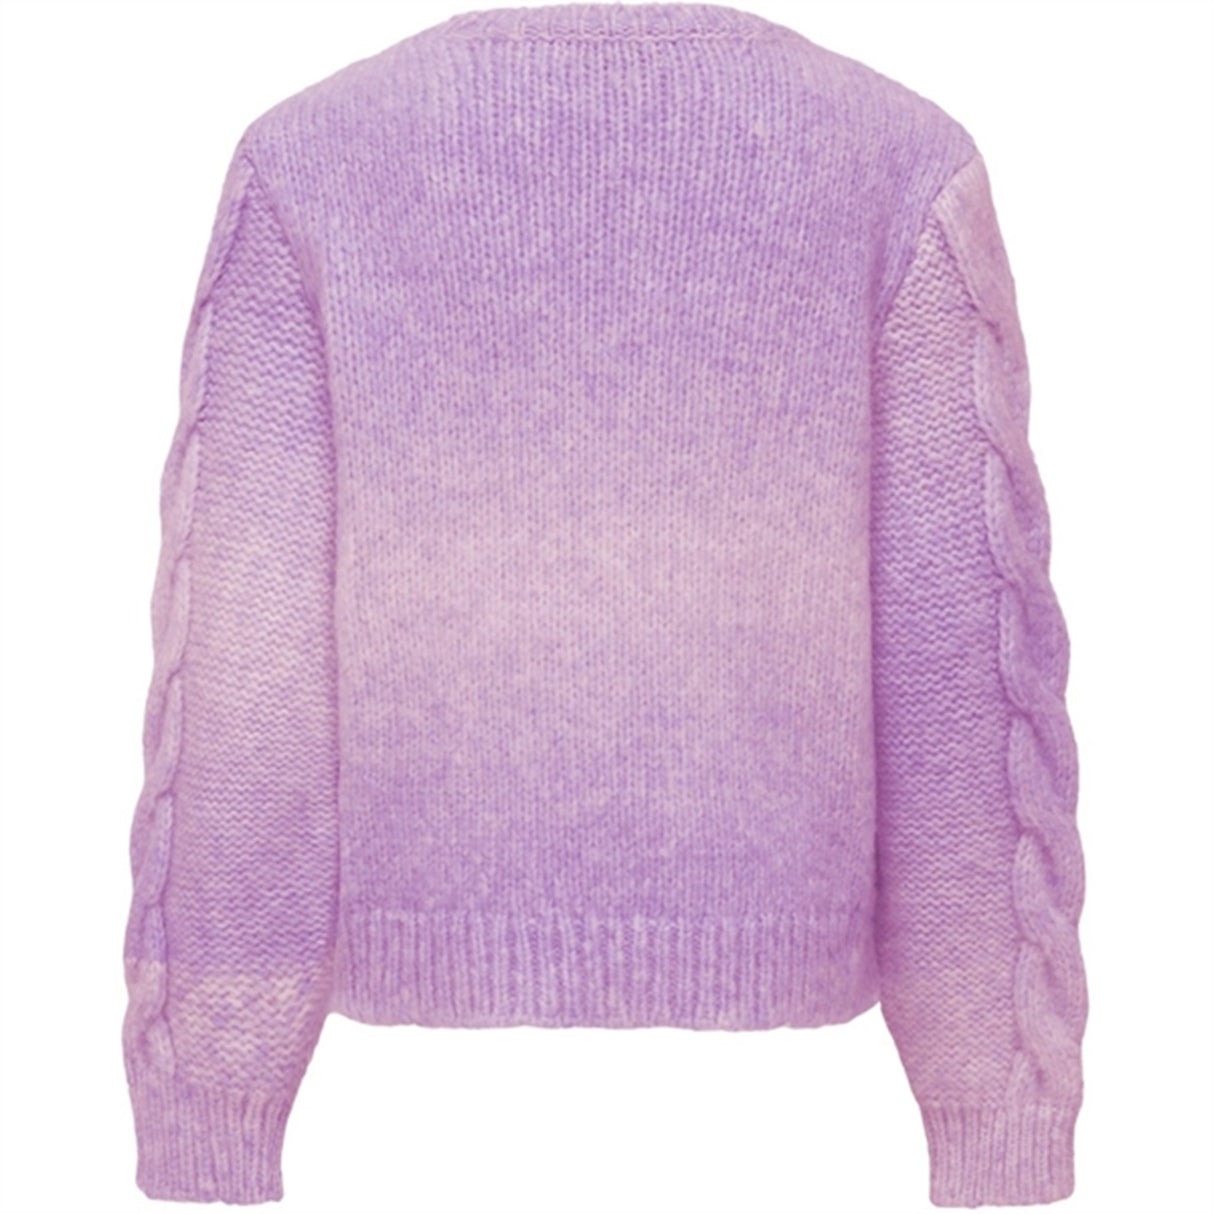 Kids ONLY Lavendula Space dyed Live Cable Knit Blouse 2